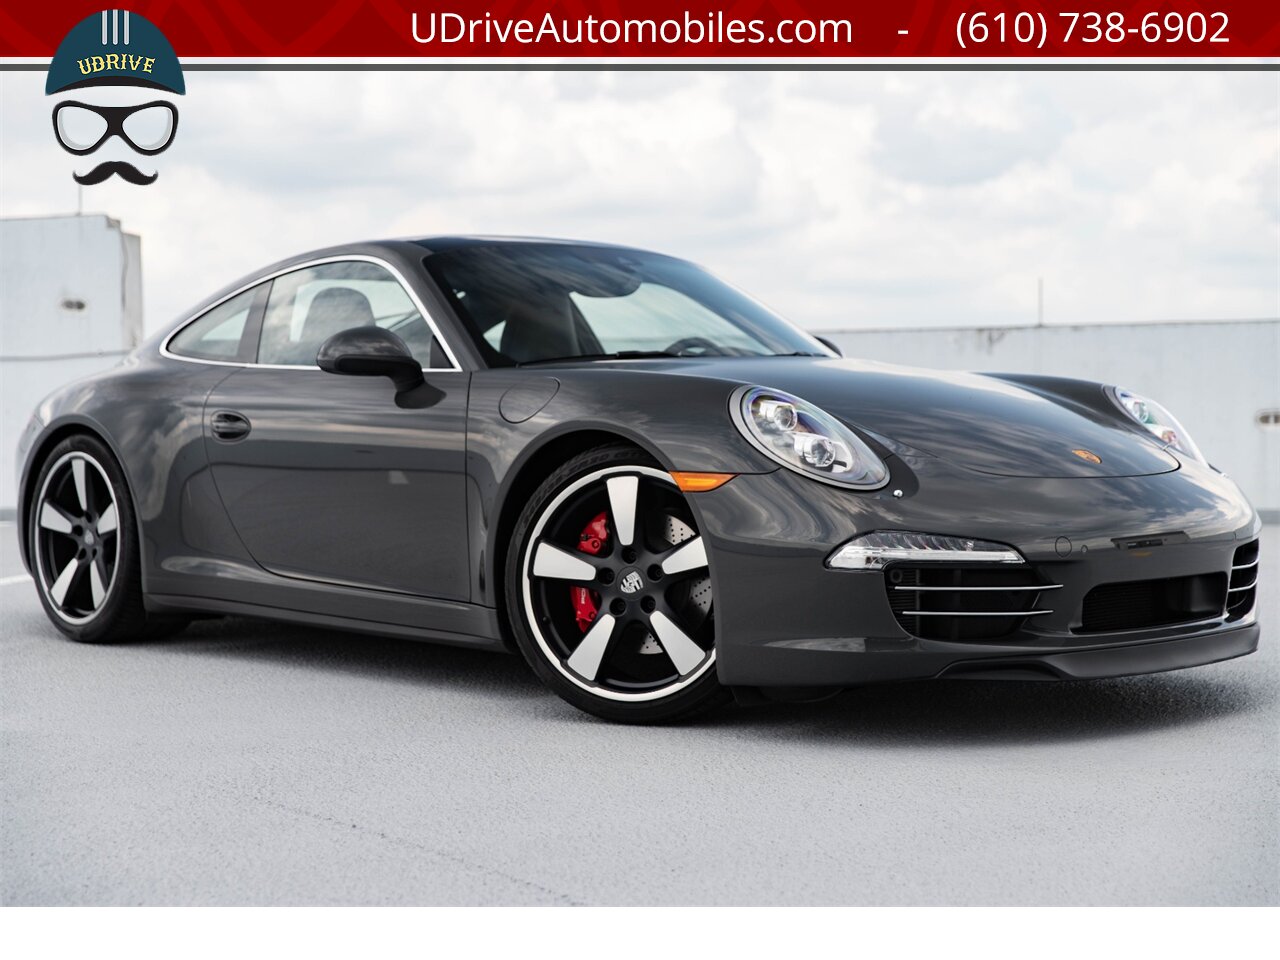 2014 Porsche 911 Carrera S 50th Anniversary Edition Certified  CPO Warranty thru 12/26/21 Full Front End Clear Film - Photo 4 - West Chester, PA 19382